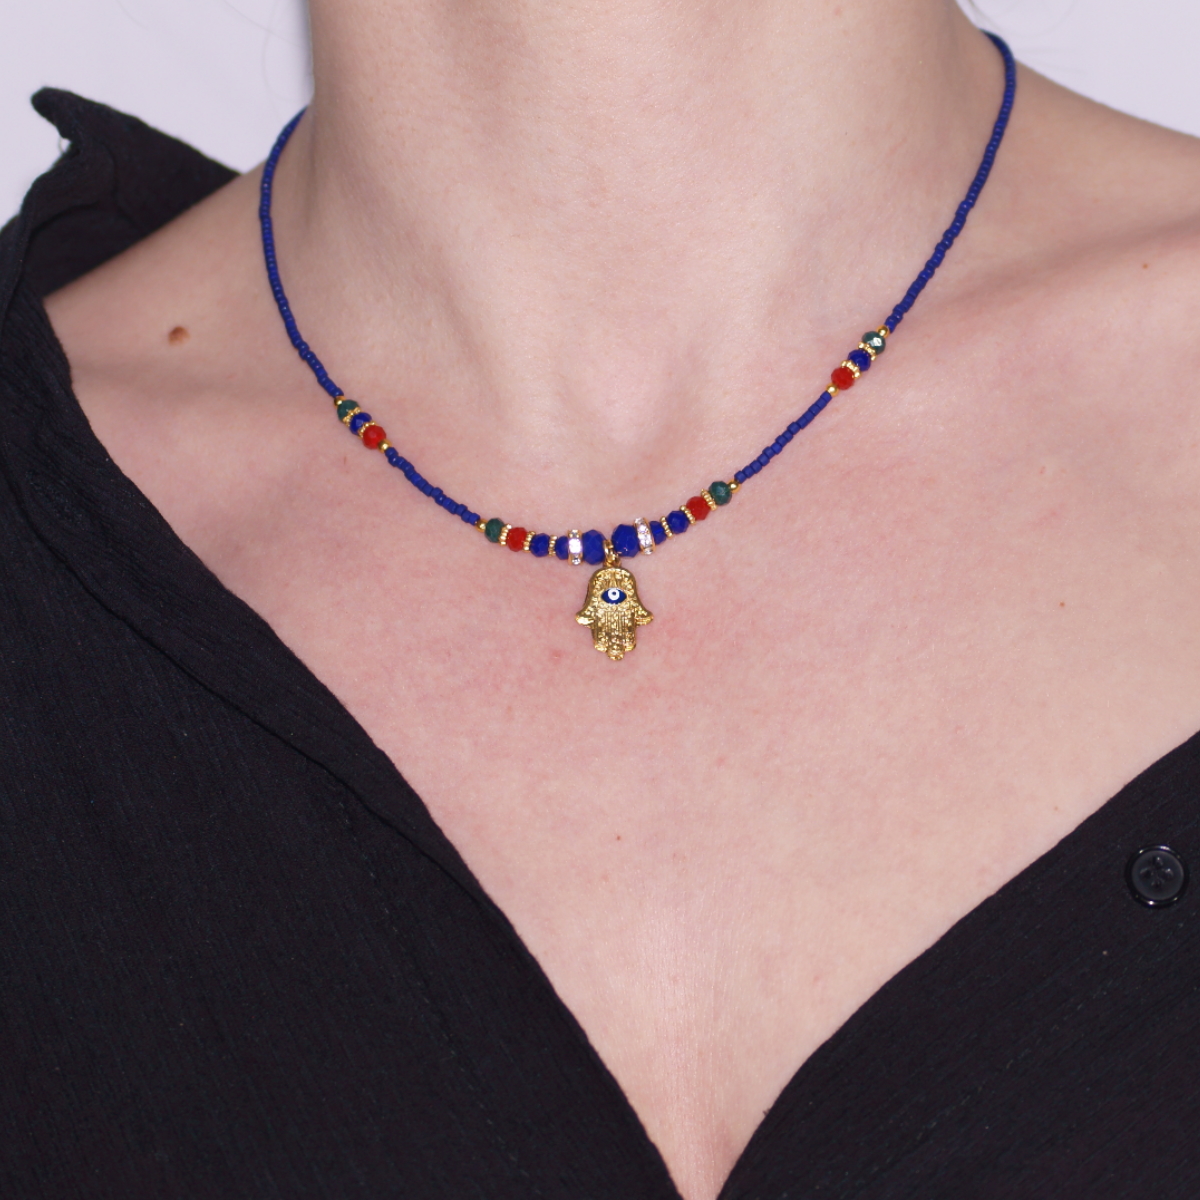 Handmade Gold Plated Hamsa Symbol Necklace with Navy Blue Stone